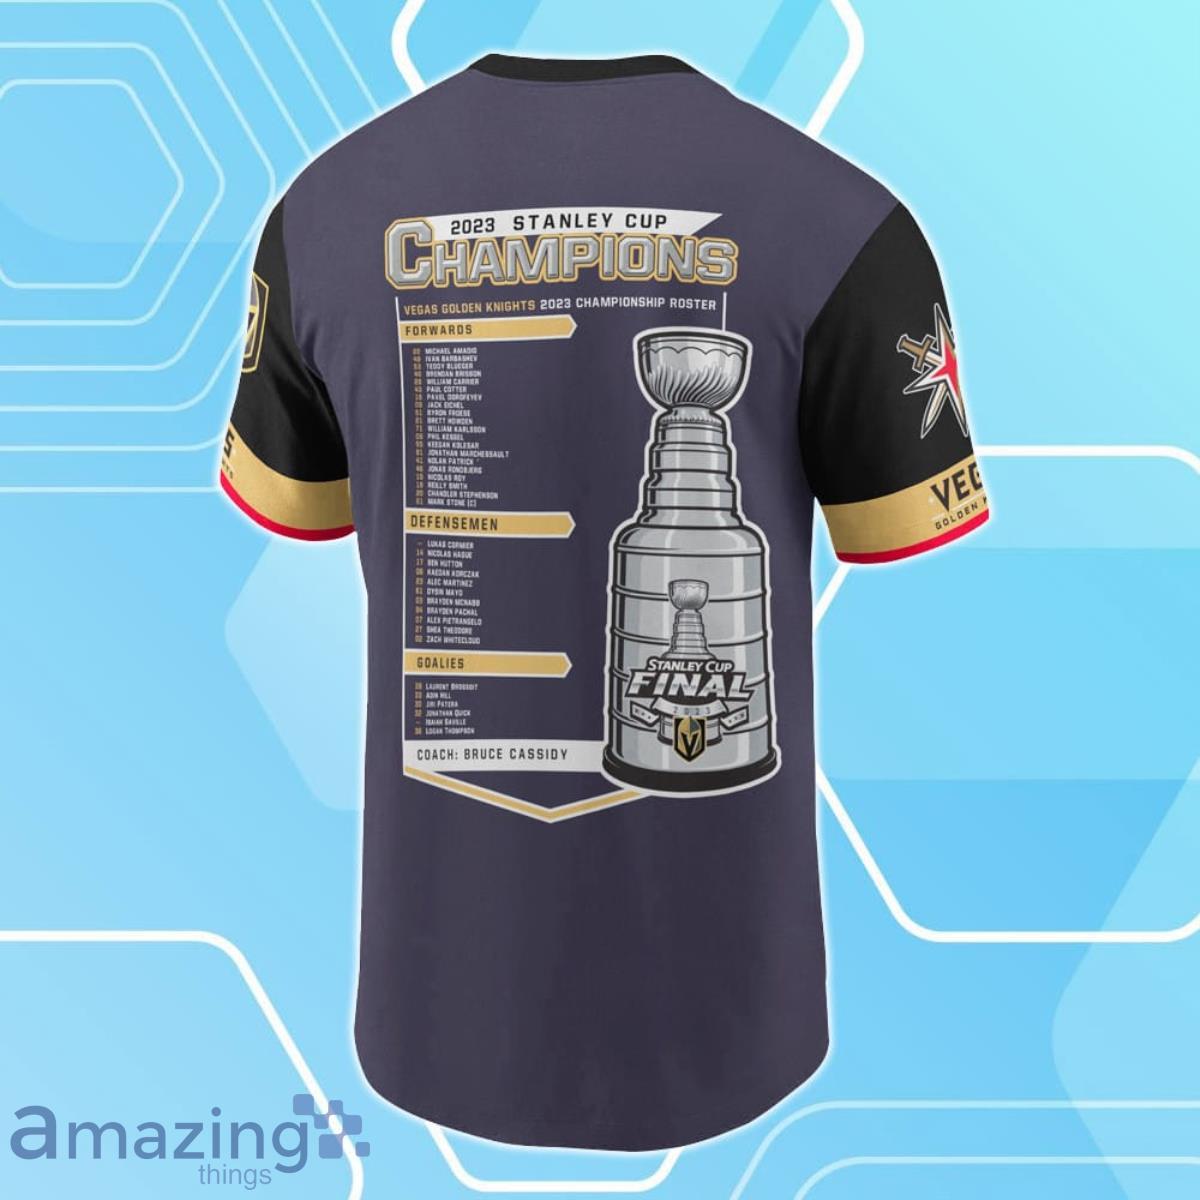 Vegas Golden Knights 2023 Stanley Cup champions shirts, hats: Where to get  more limited championship fan gear 